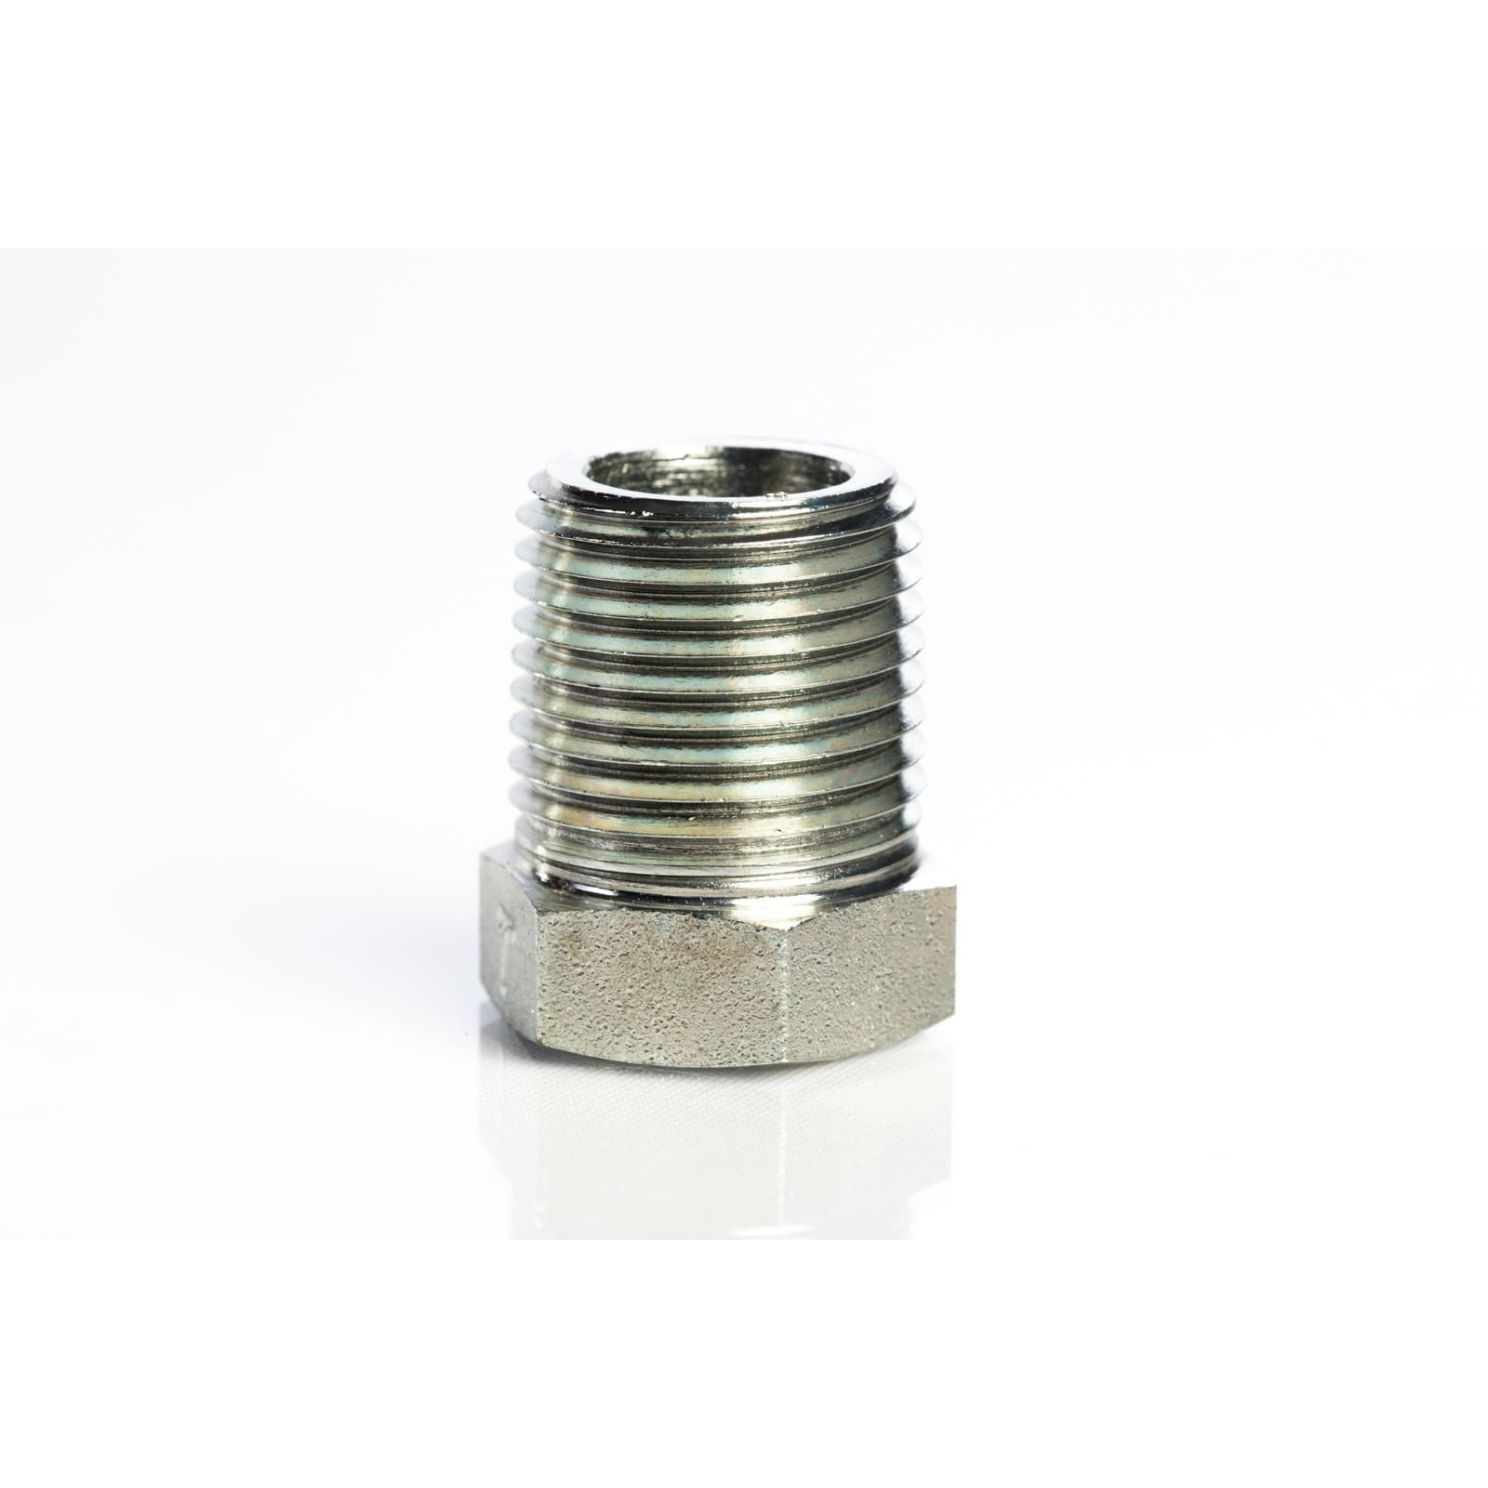 Tompkins 5406-8-6 Steel Hydraulic Adapter Fitting